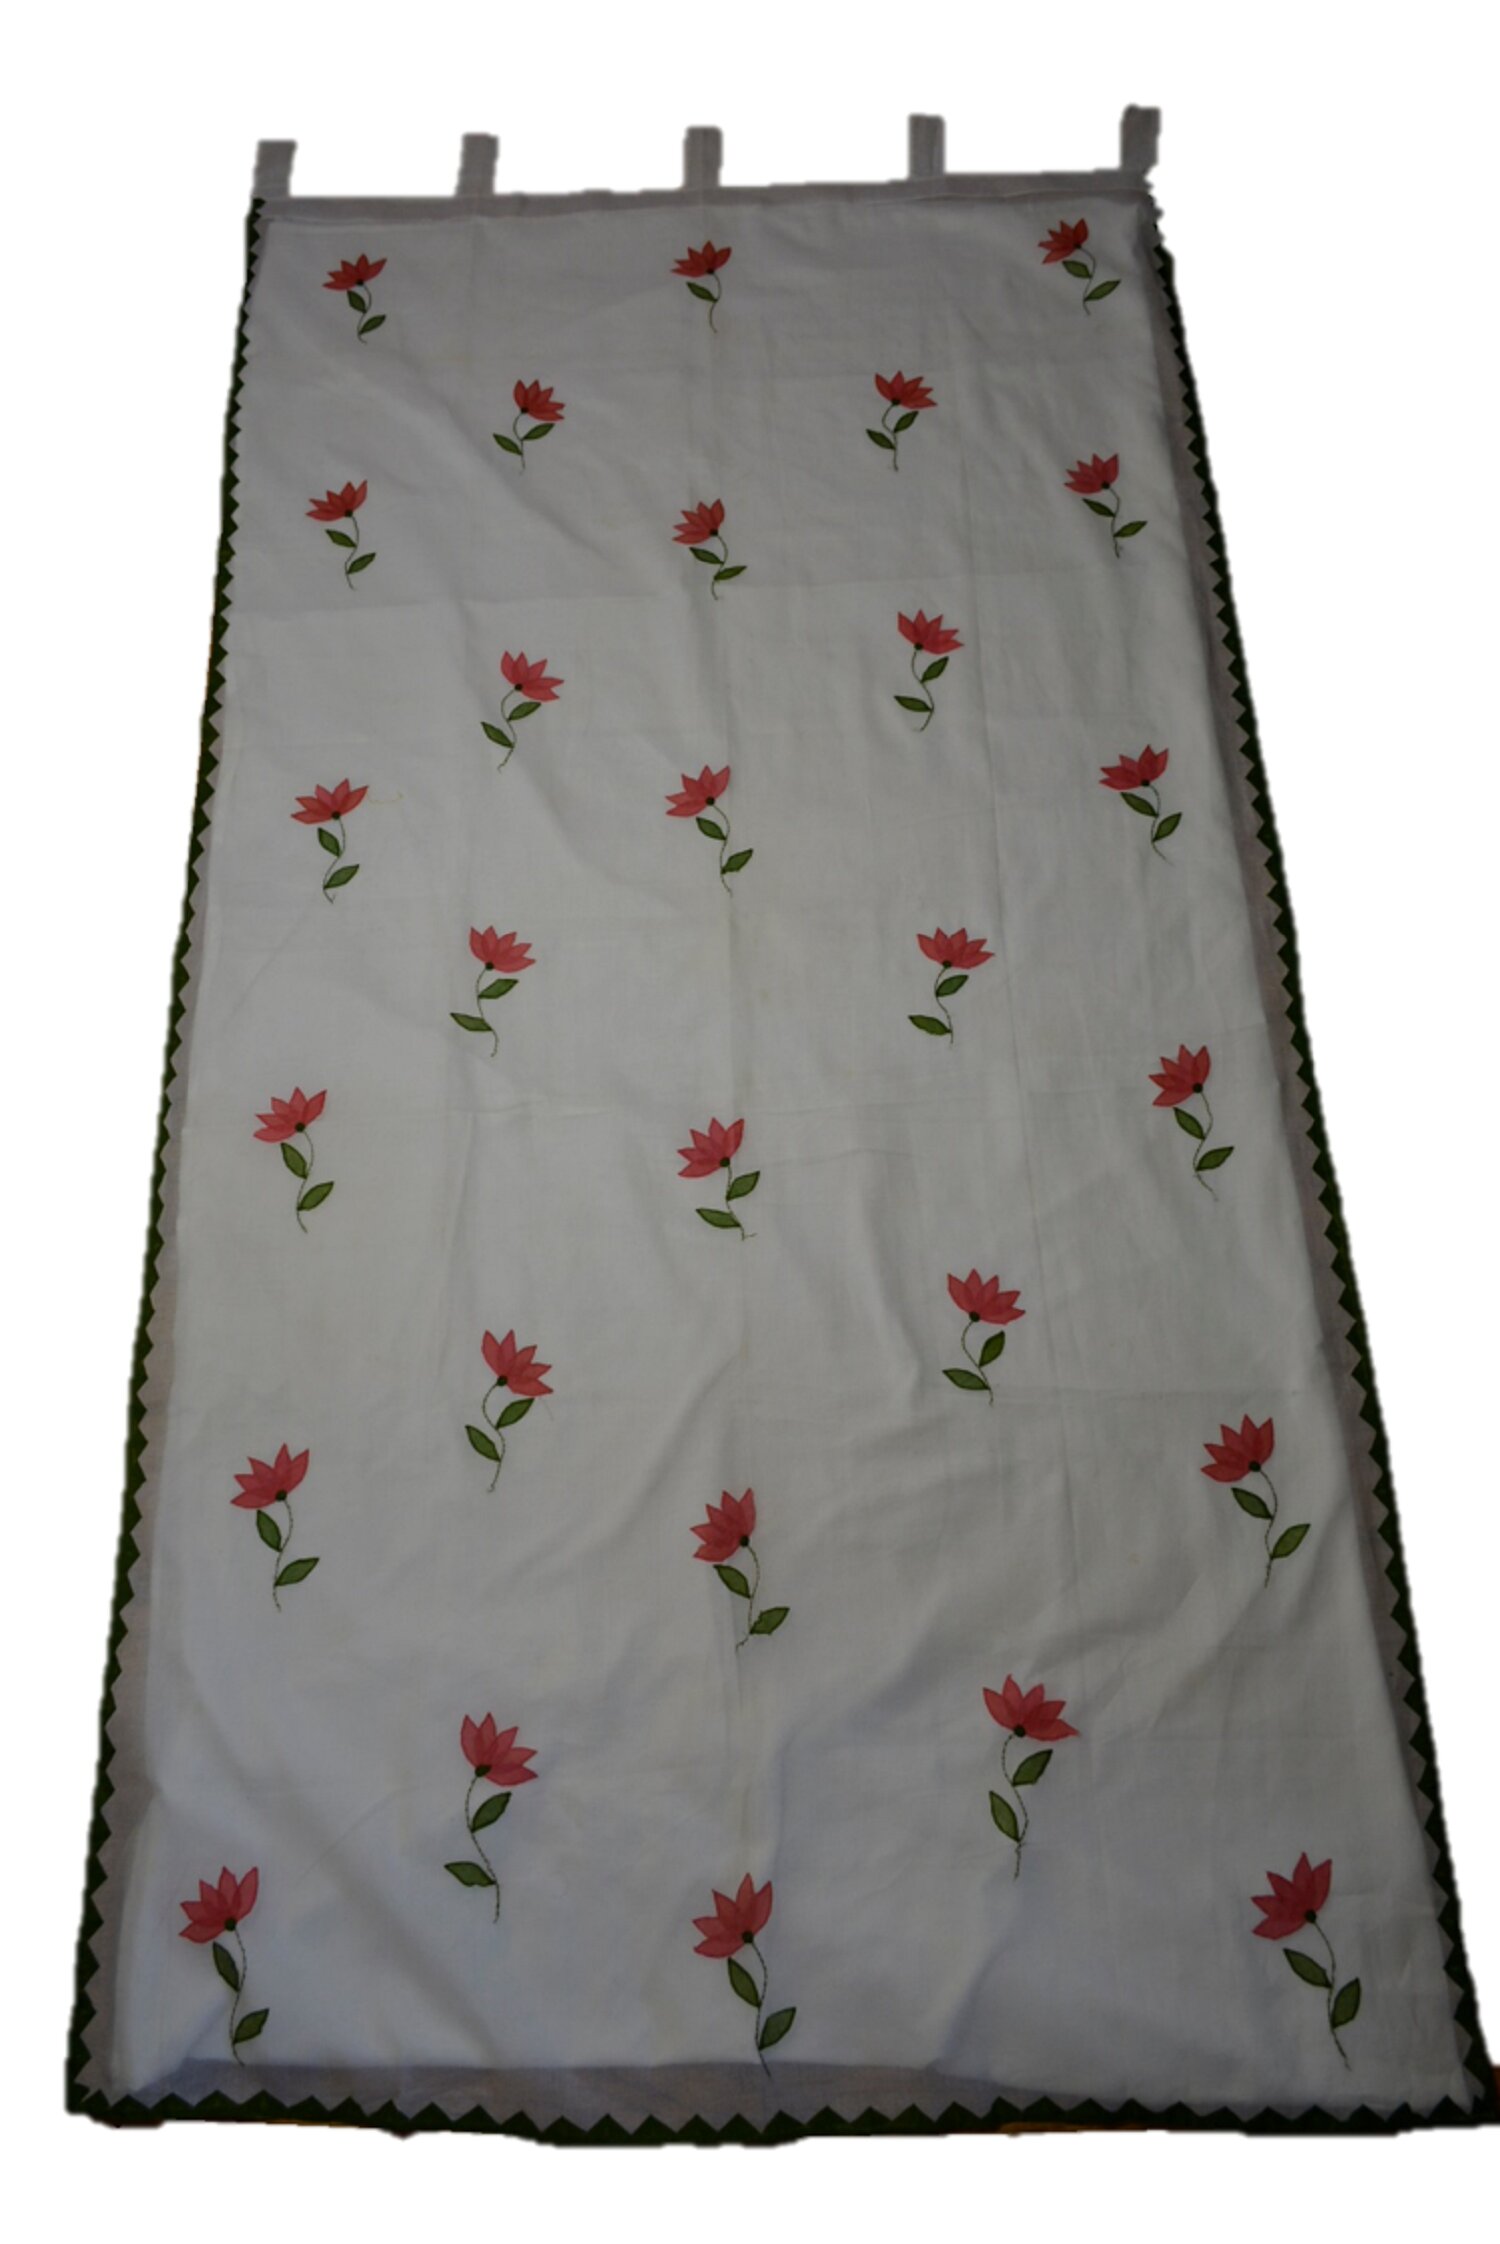 COTTON AND ORGANDI white with cutout and applique of a tree of life pattern